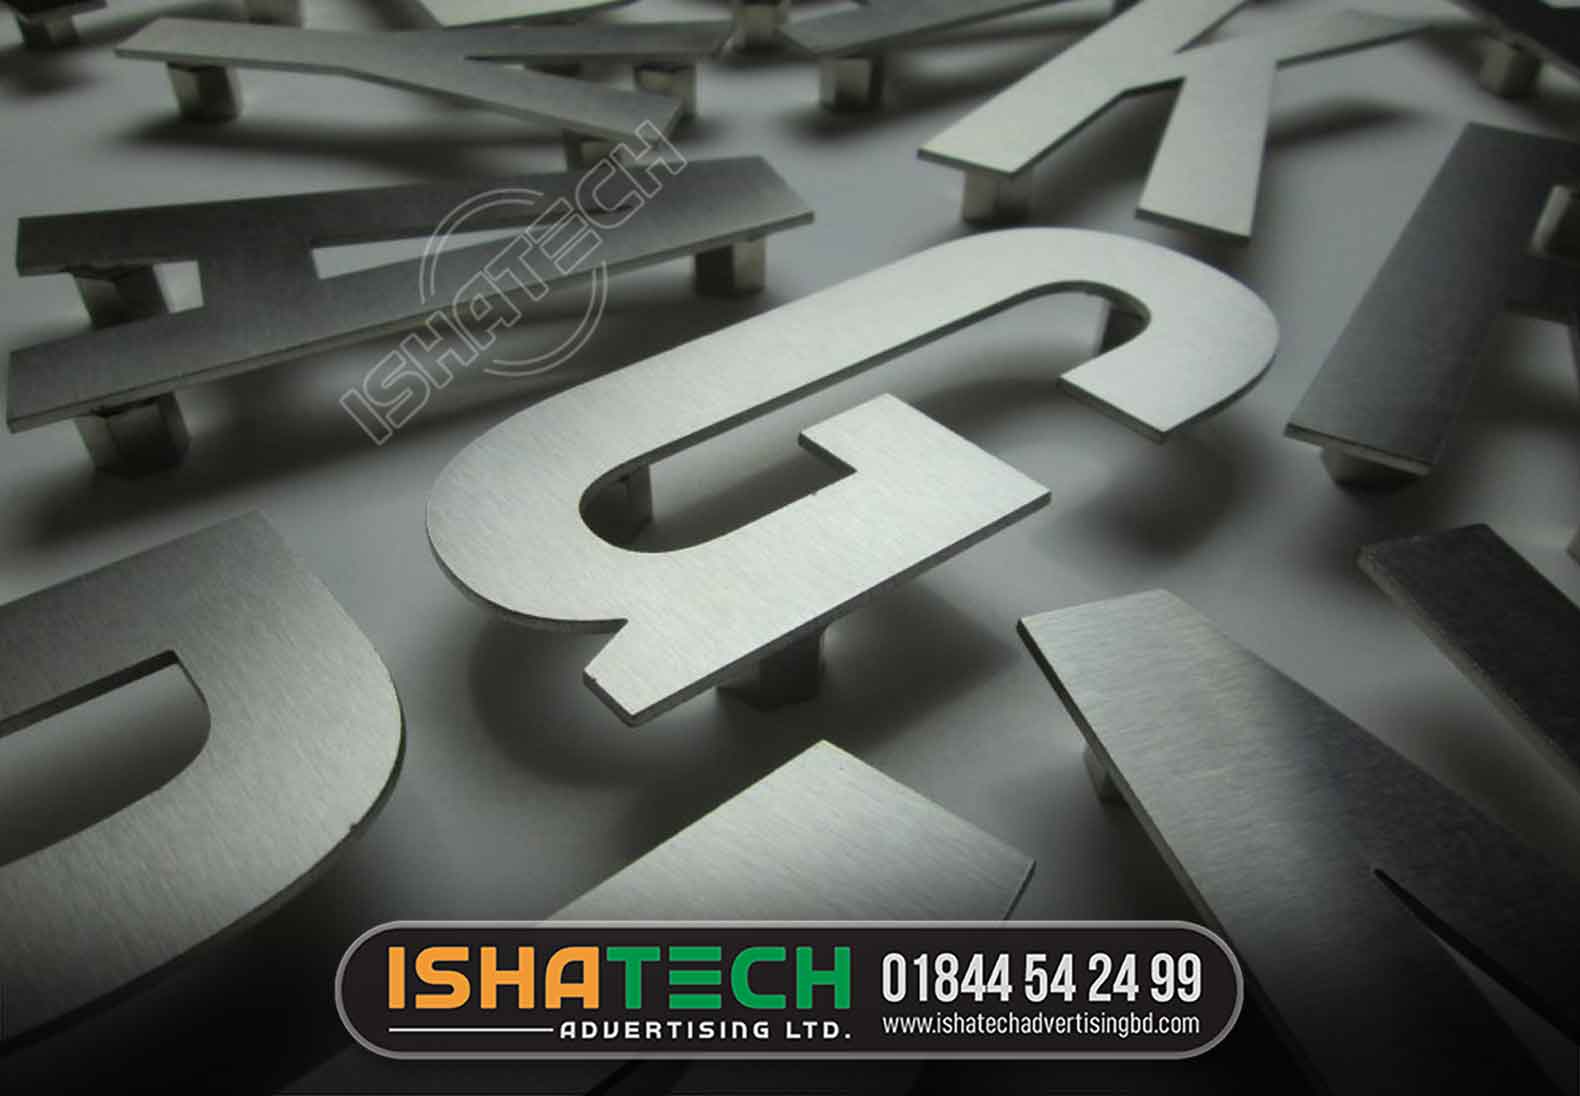 Stainless Steel Letter Manufacturers & Suppliers, SS Letter - Stainless Steel Letter Manufacturer, Top Stainless Steel Letter Manufacturers in Dhaka